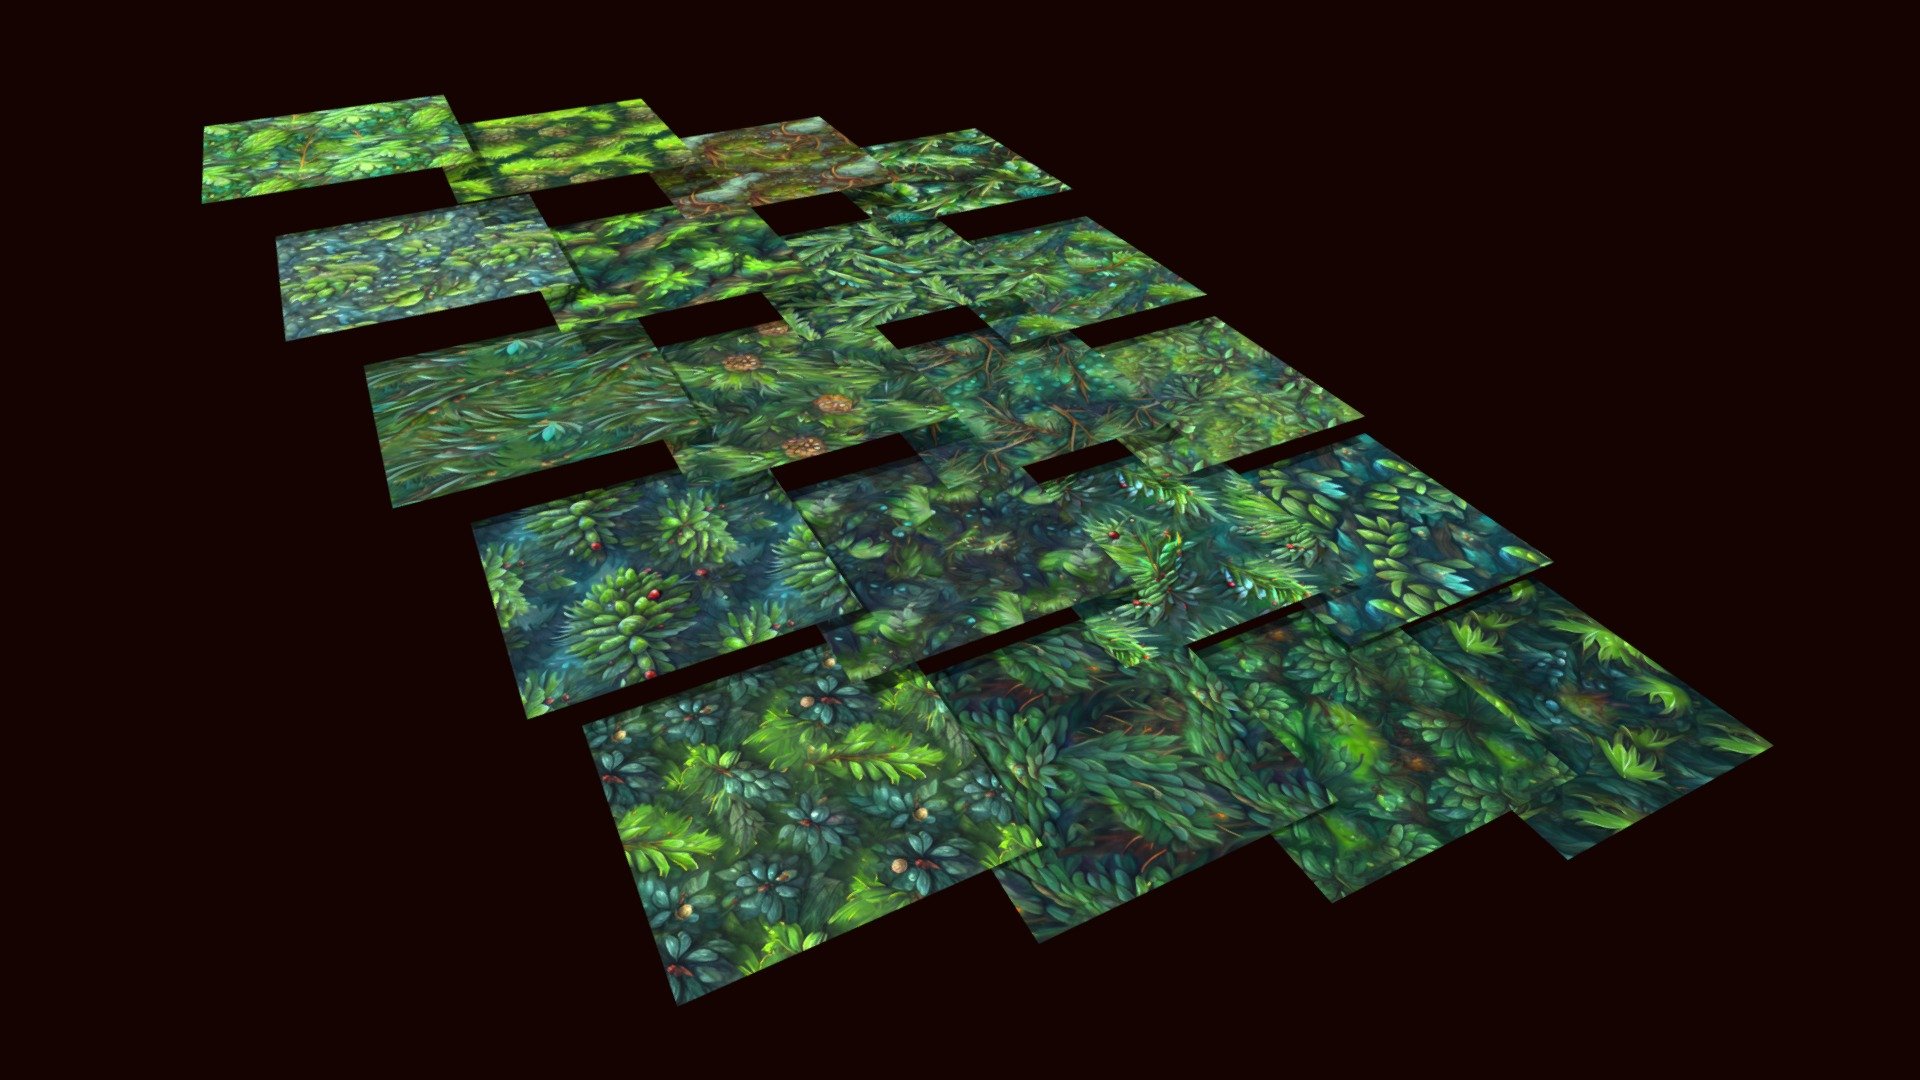 You feel spruce and nettles under the boots. Beneath you, all the hills are covered in pine trees. Mysterious forest awaits..

Textures were made to be tileable, meaning they will have no seams.





20 Color Textures (tileable)




2048 x 2048 size




Hand Painted




Mobile friendly



Help us by rating and commenting, this will motivate us to create more assets and improve :) - Grass Pine Forest 20 TEXTURES (Handpainted) #4 - Buy Royalty Free 3D model by Texture Me (@textureme) 3d model